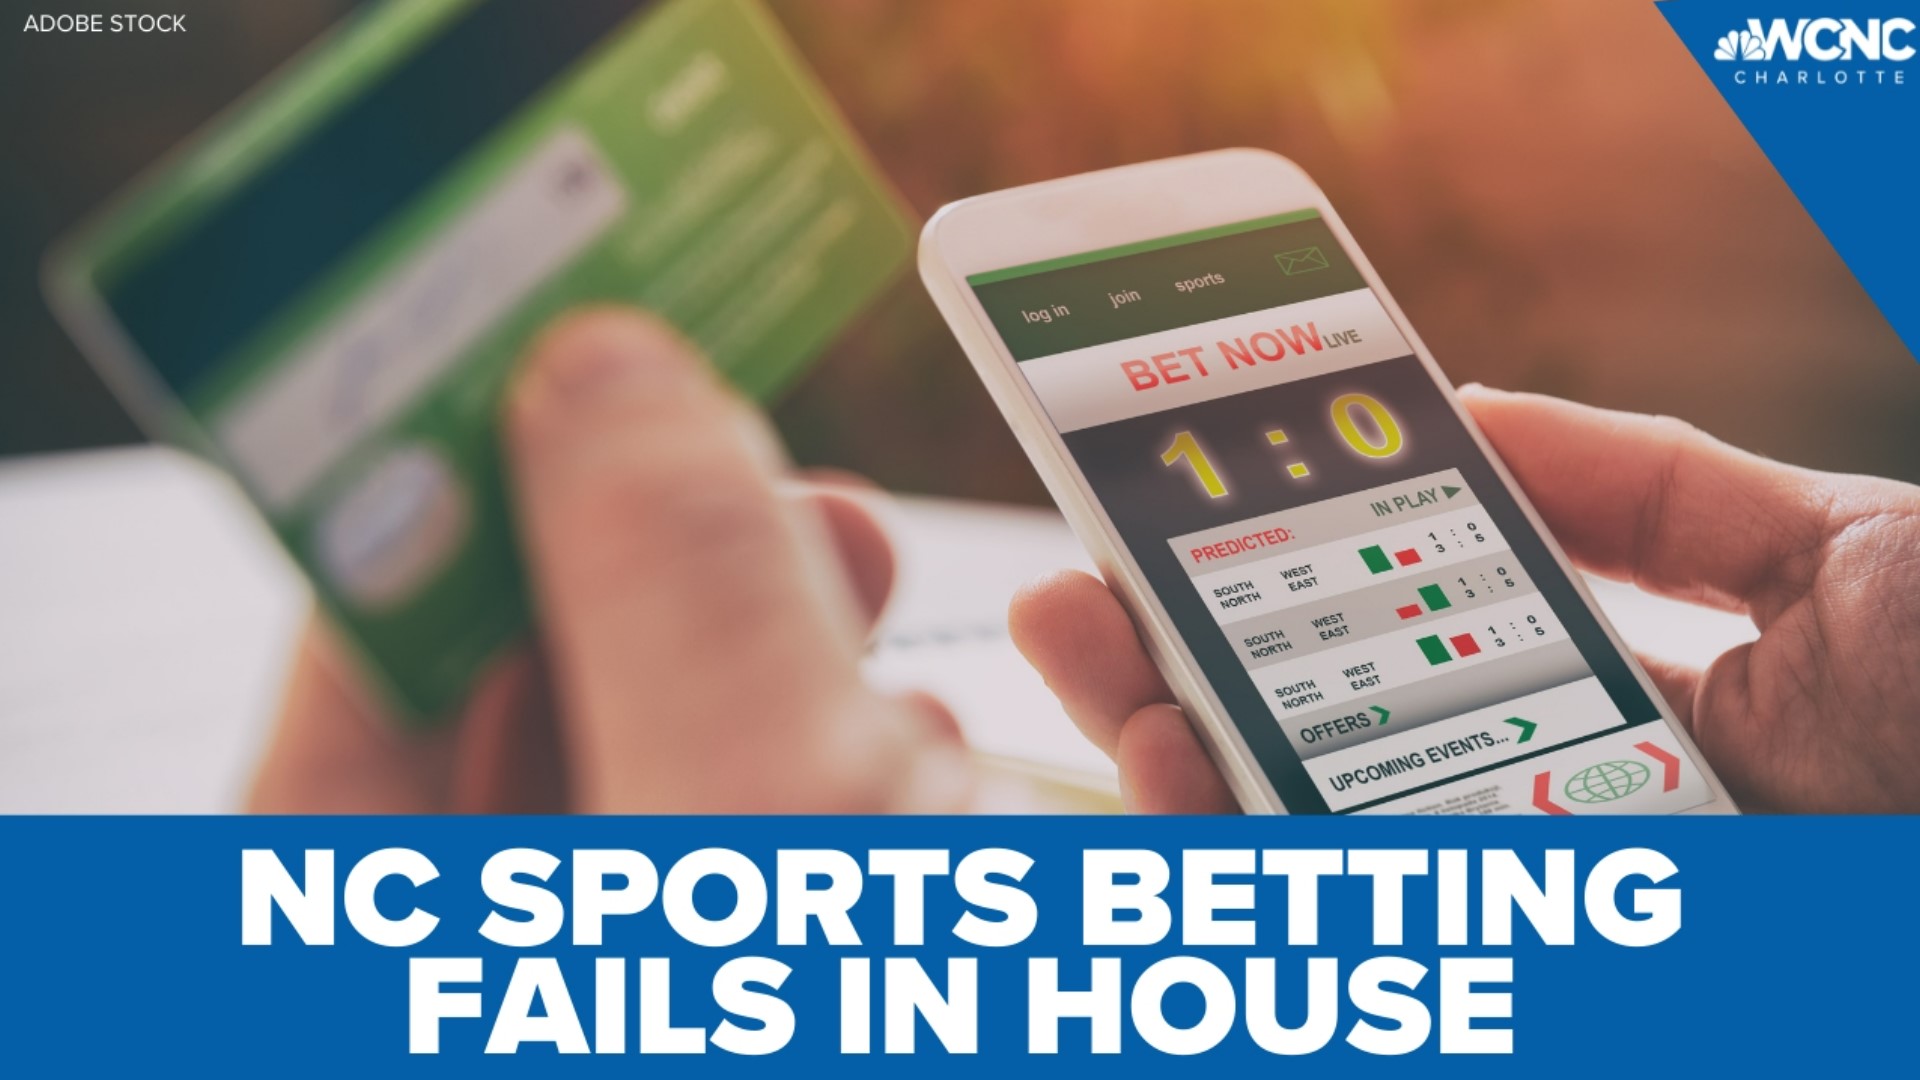 The House voted 51-50 not to approve one of two measures that, when combined, would have established the rules to authorize and regulate gambling on sports.